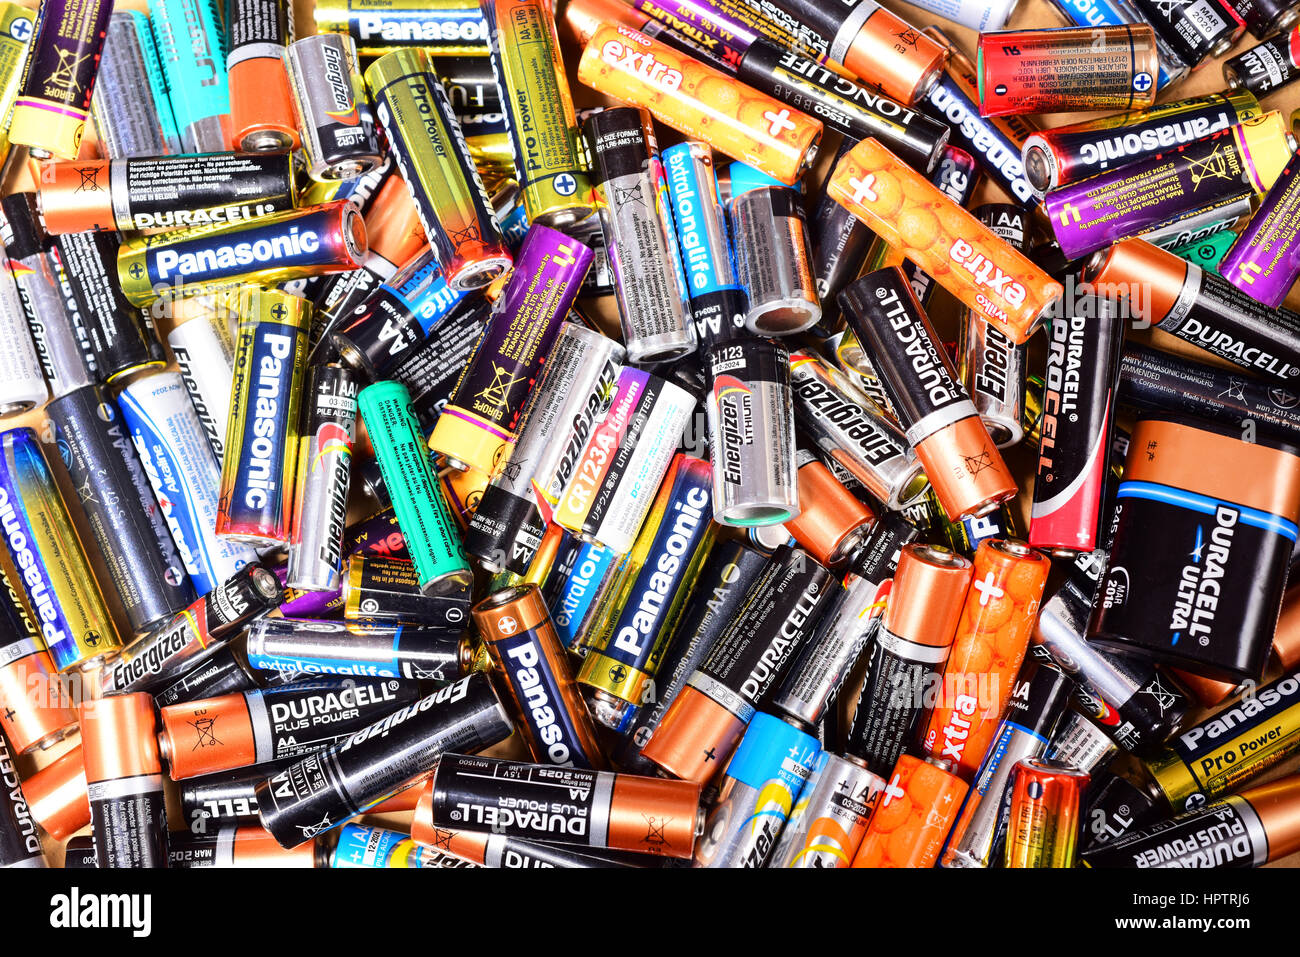 giant pile of old AA and AAA batteries Stock Photo